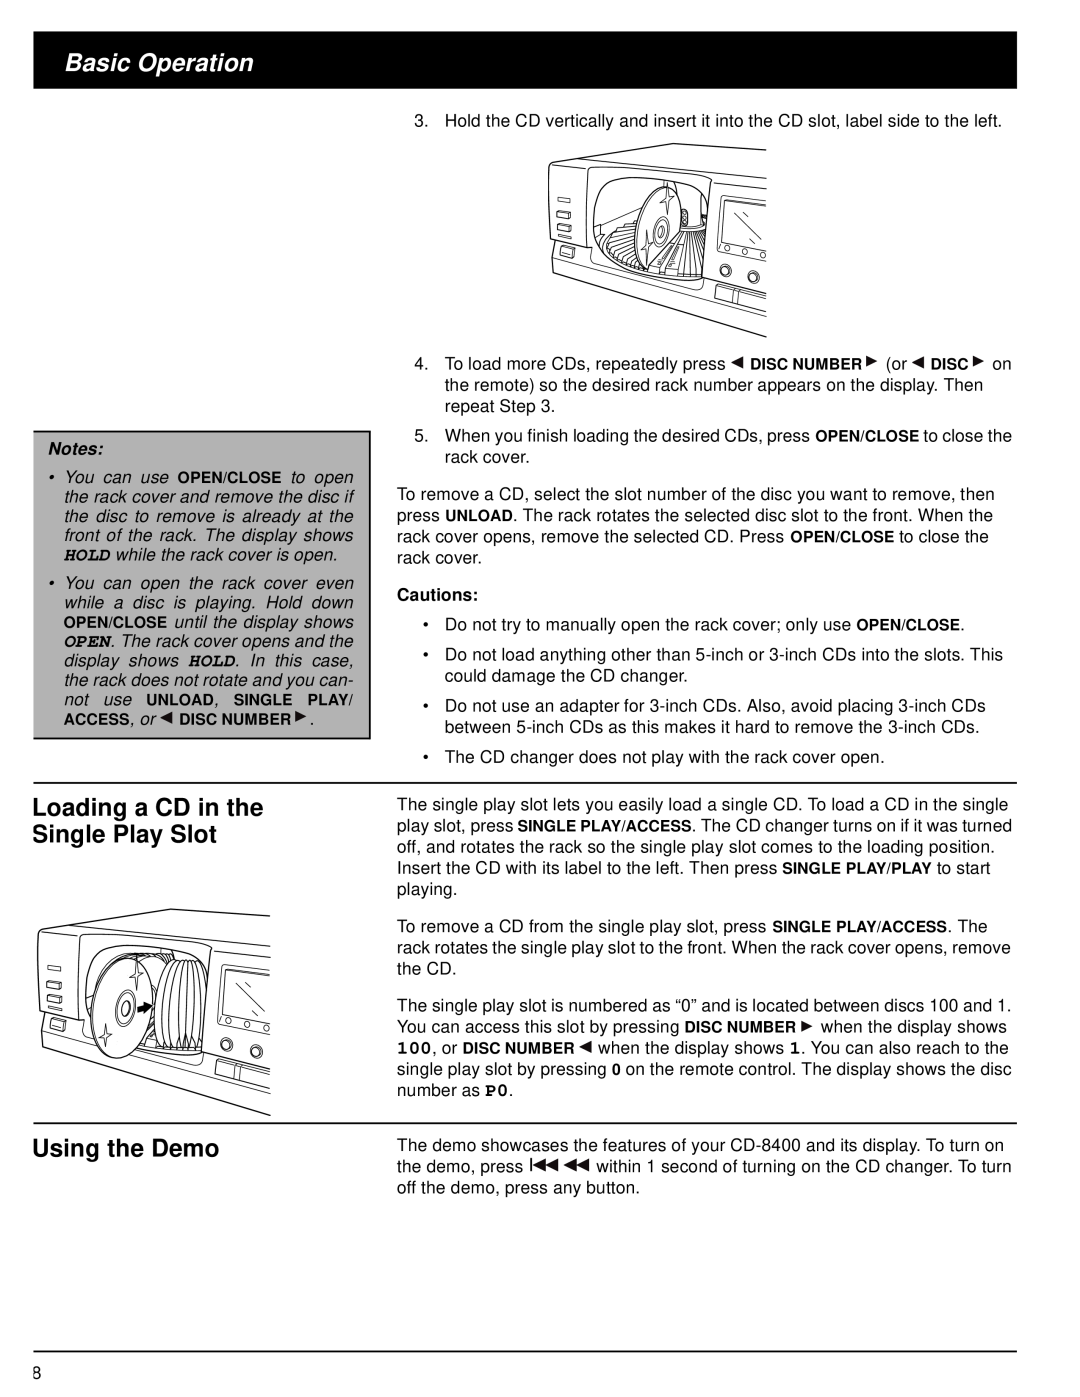 Radio Shack CD-8400 owner manual Basic Operation, Loading a CD in the Single Play Slot, Using the Demo, Cautions 